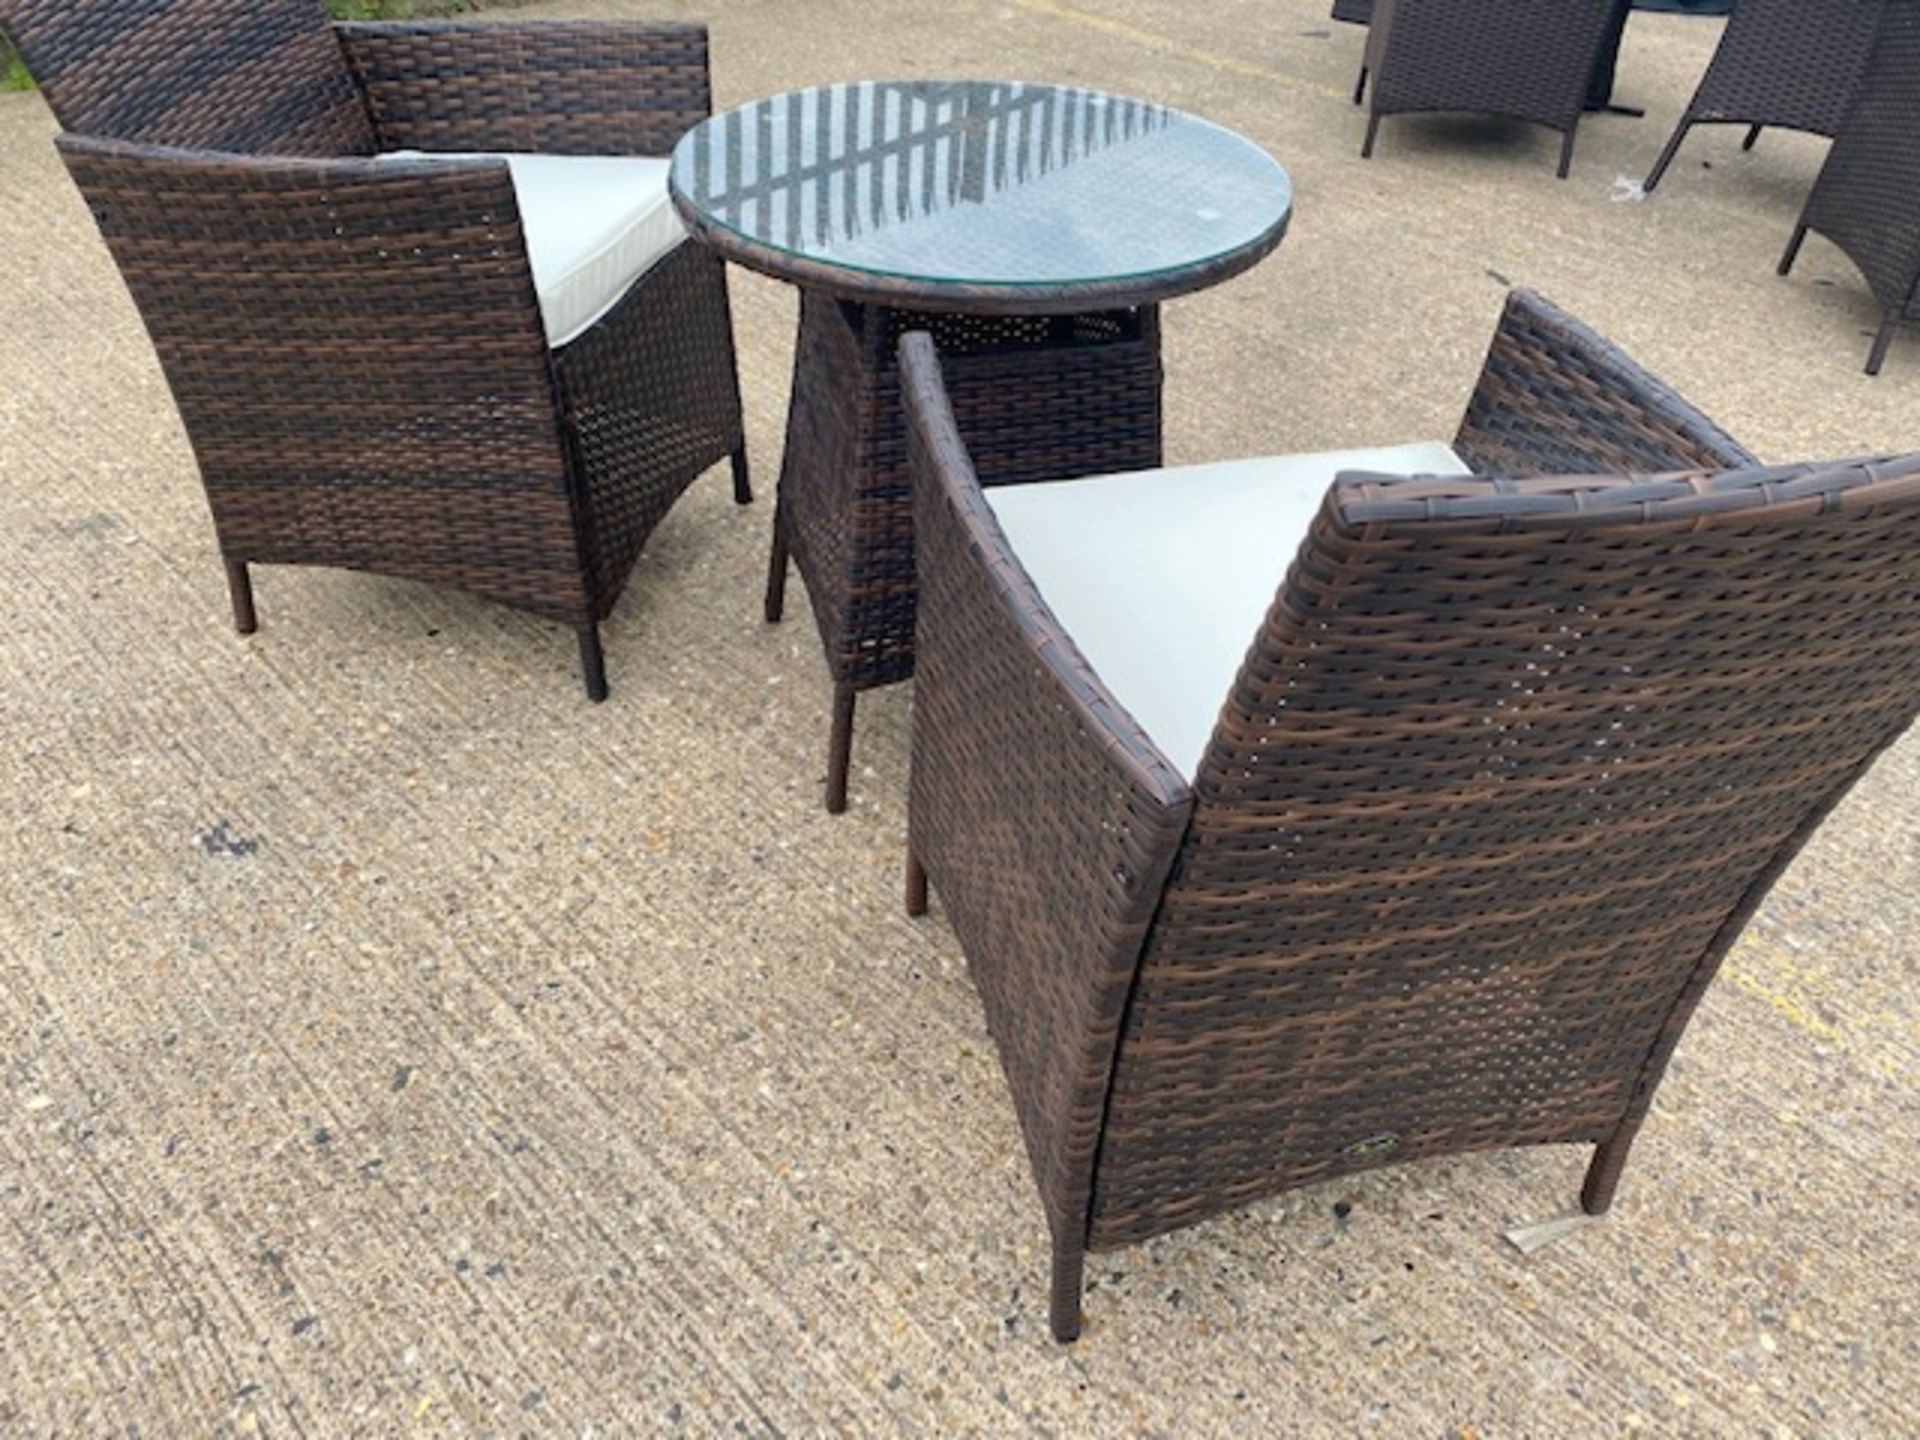 + VAT Brand New Chelsea Garden Company Two Person Dining Set -Item Is Immediatley Available - - Image 5 of 5